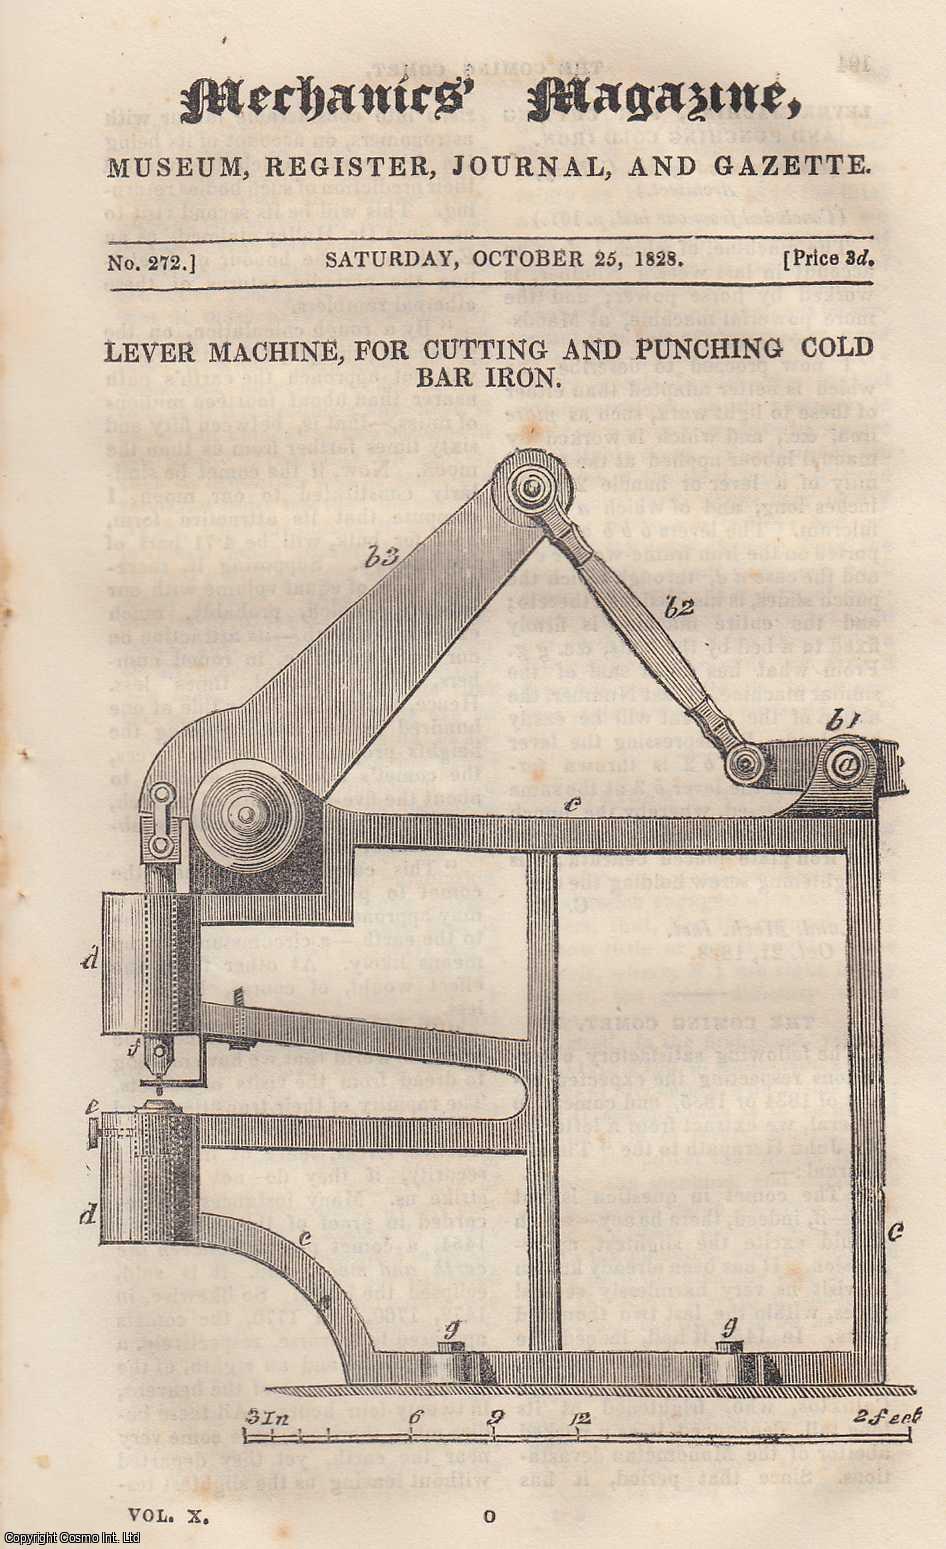 Mechanics Magazine - Lever Machine, For Cutting and Punching Cold Bar Iron; Steam Carriages; Weight of The Earth, and Pressure of The Atmosphere; Design of a Villa Gate, and Description of an Improved Latch; Ballooning, etc. Mechanics Magazine, Museum, Register, Journal and Gazette. Issue No. 272. A complete rare weekly issue of the Mechanics' Magazine, 1828.